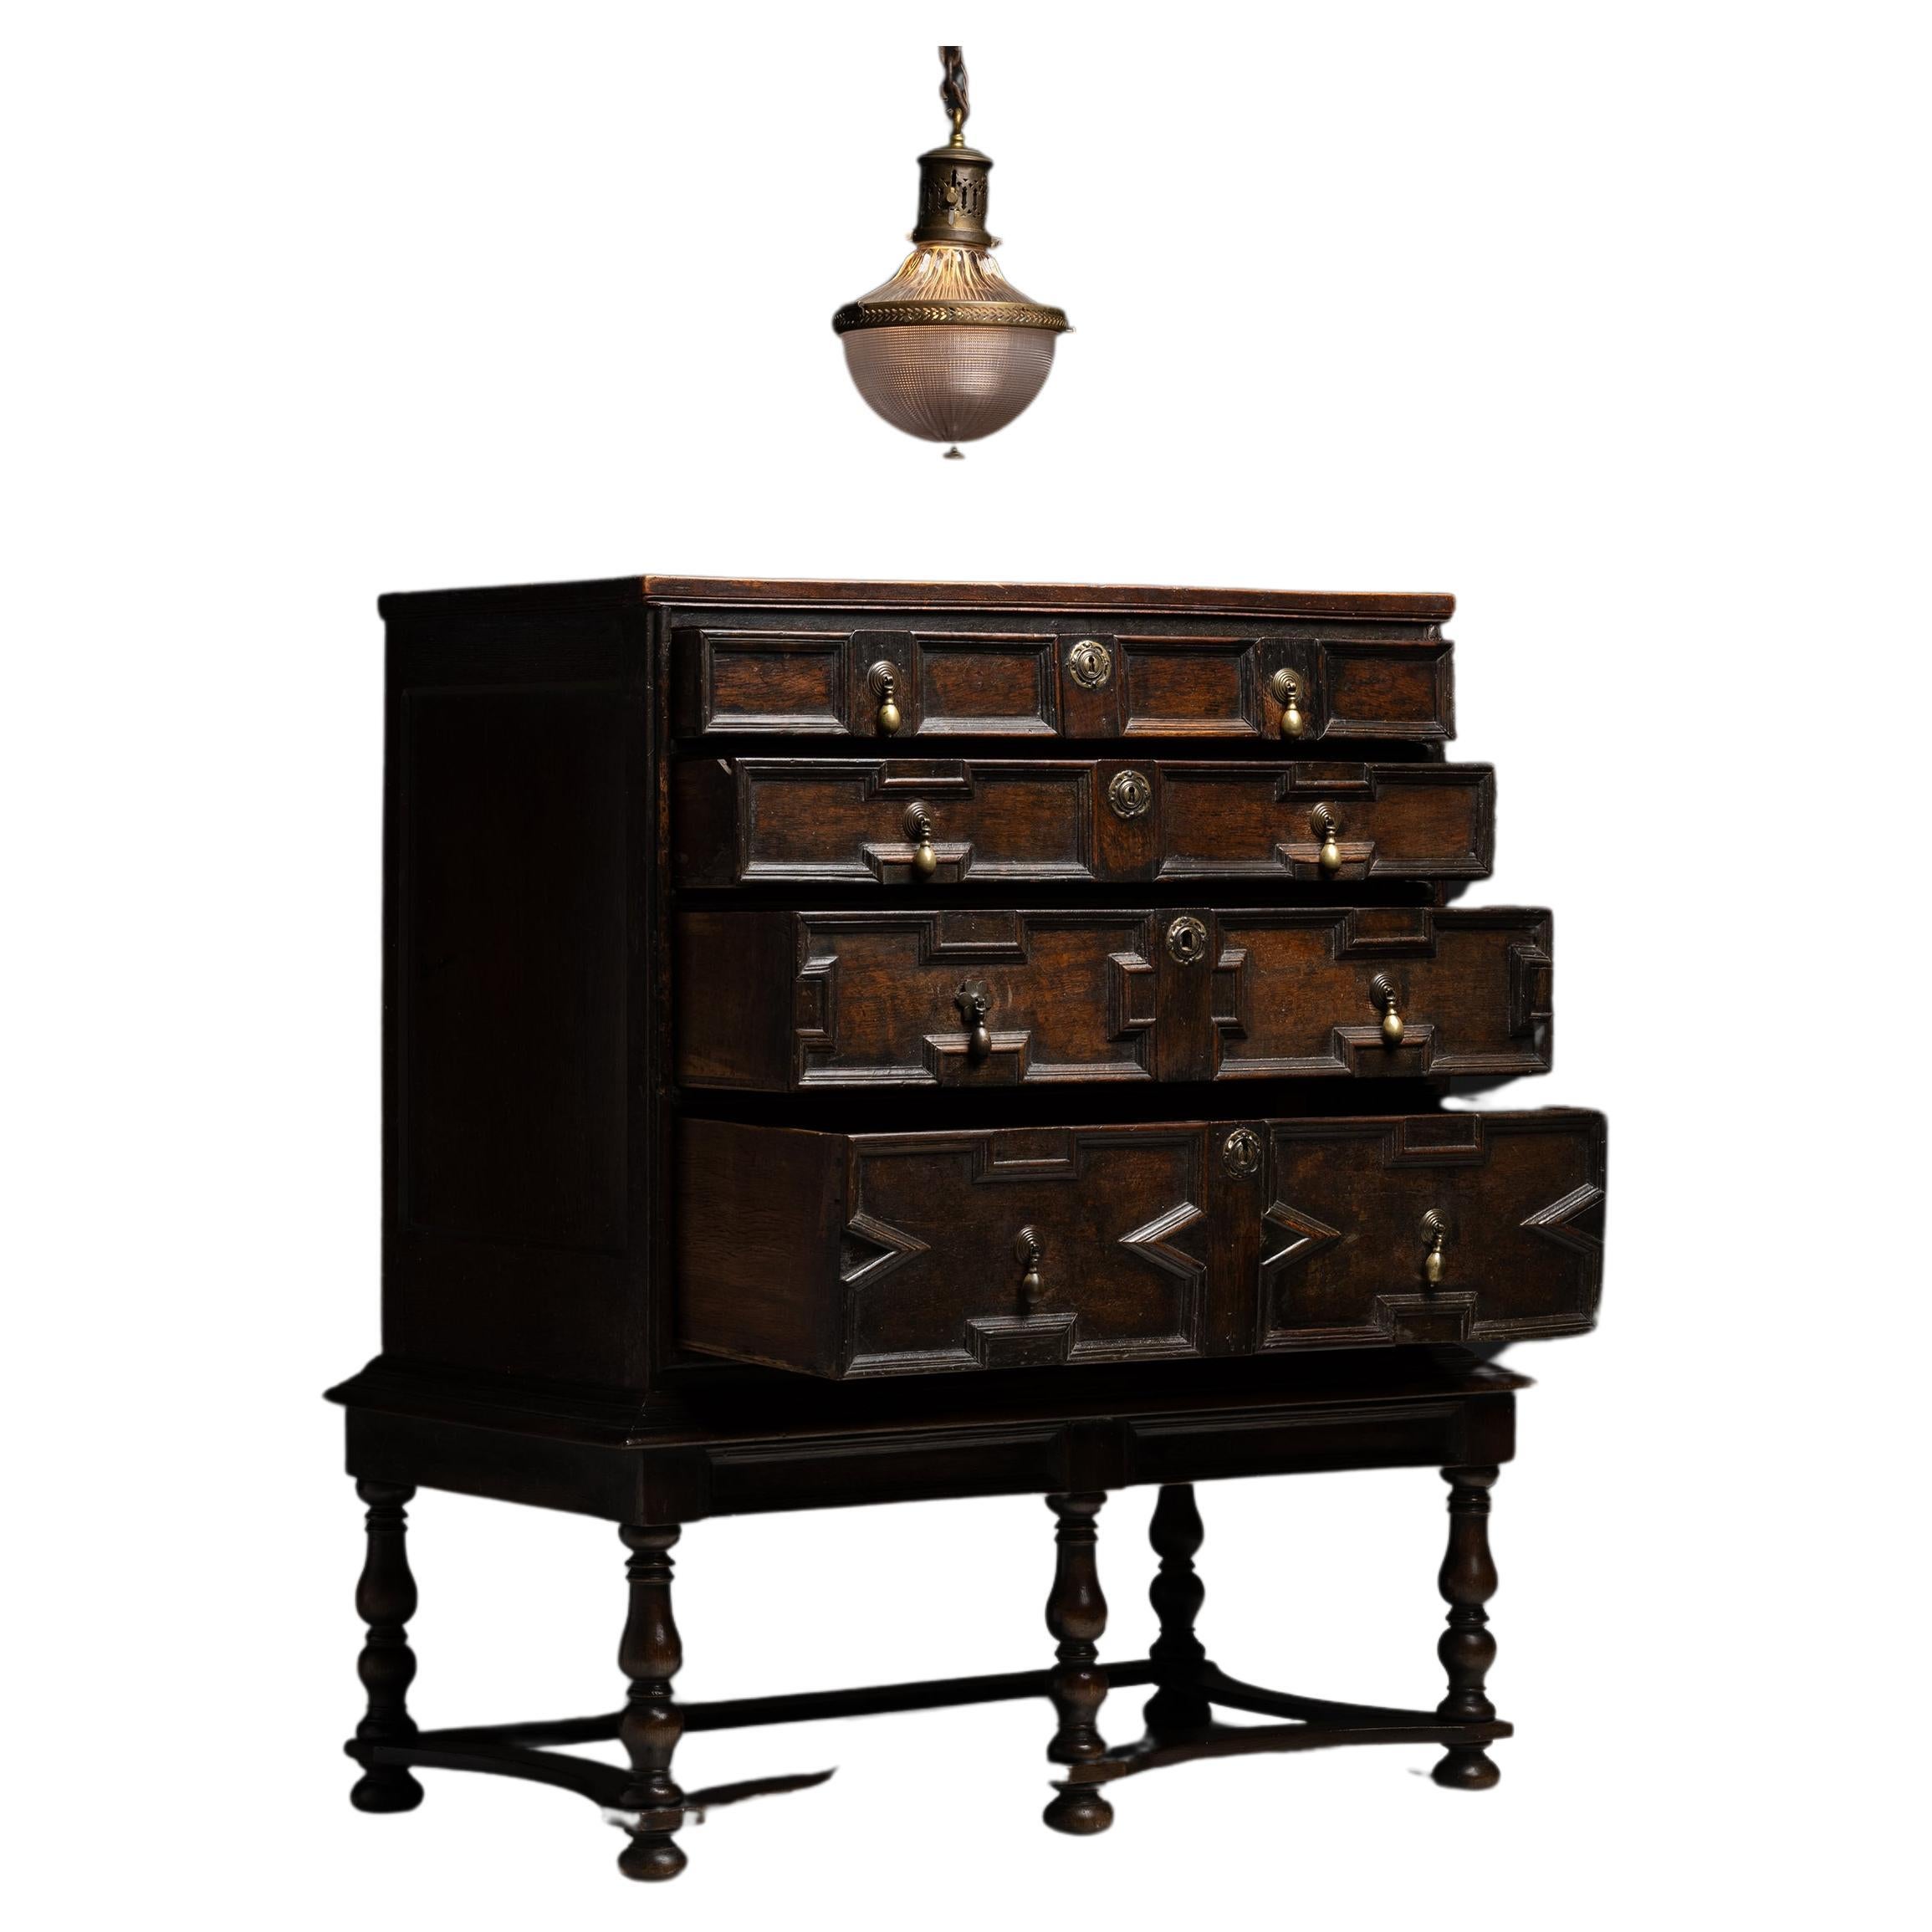 Commode sur Stand, Angleterre vers 1760